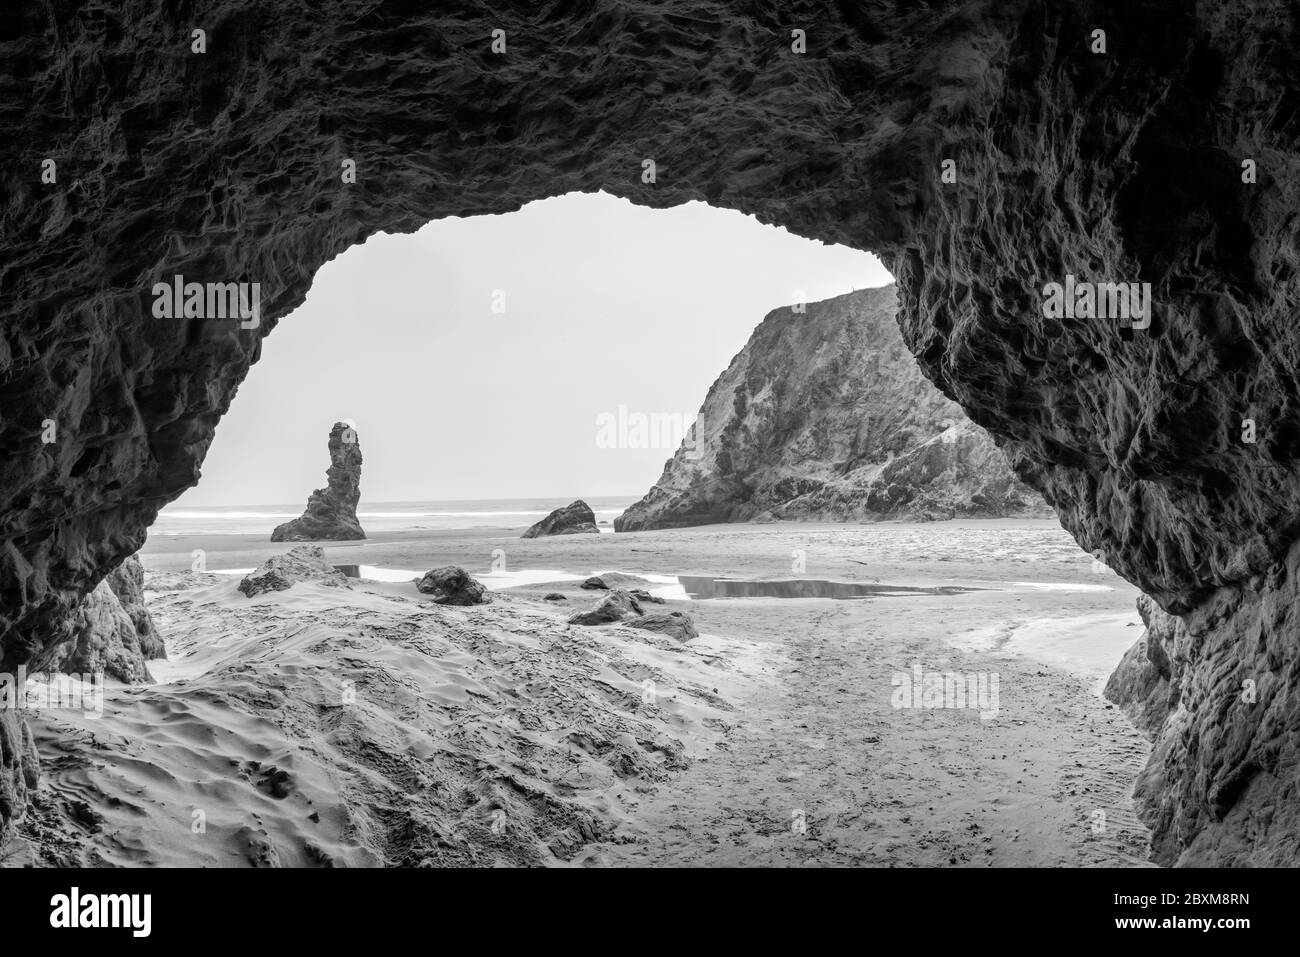 Sea cave on a beach in Bandon, Oregon opens to views of Howling Dog Rock and other sea stacks. Stock Photo